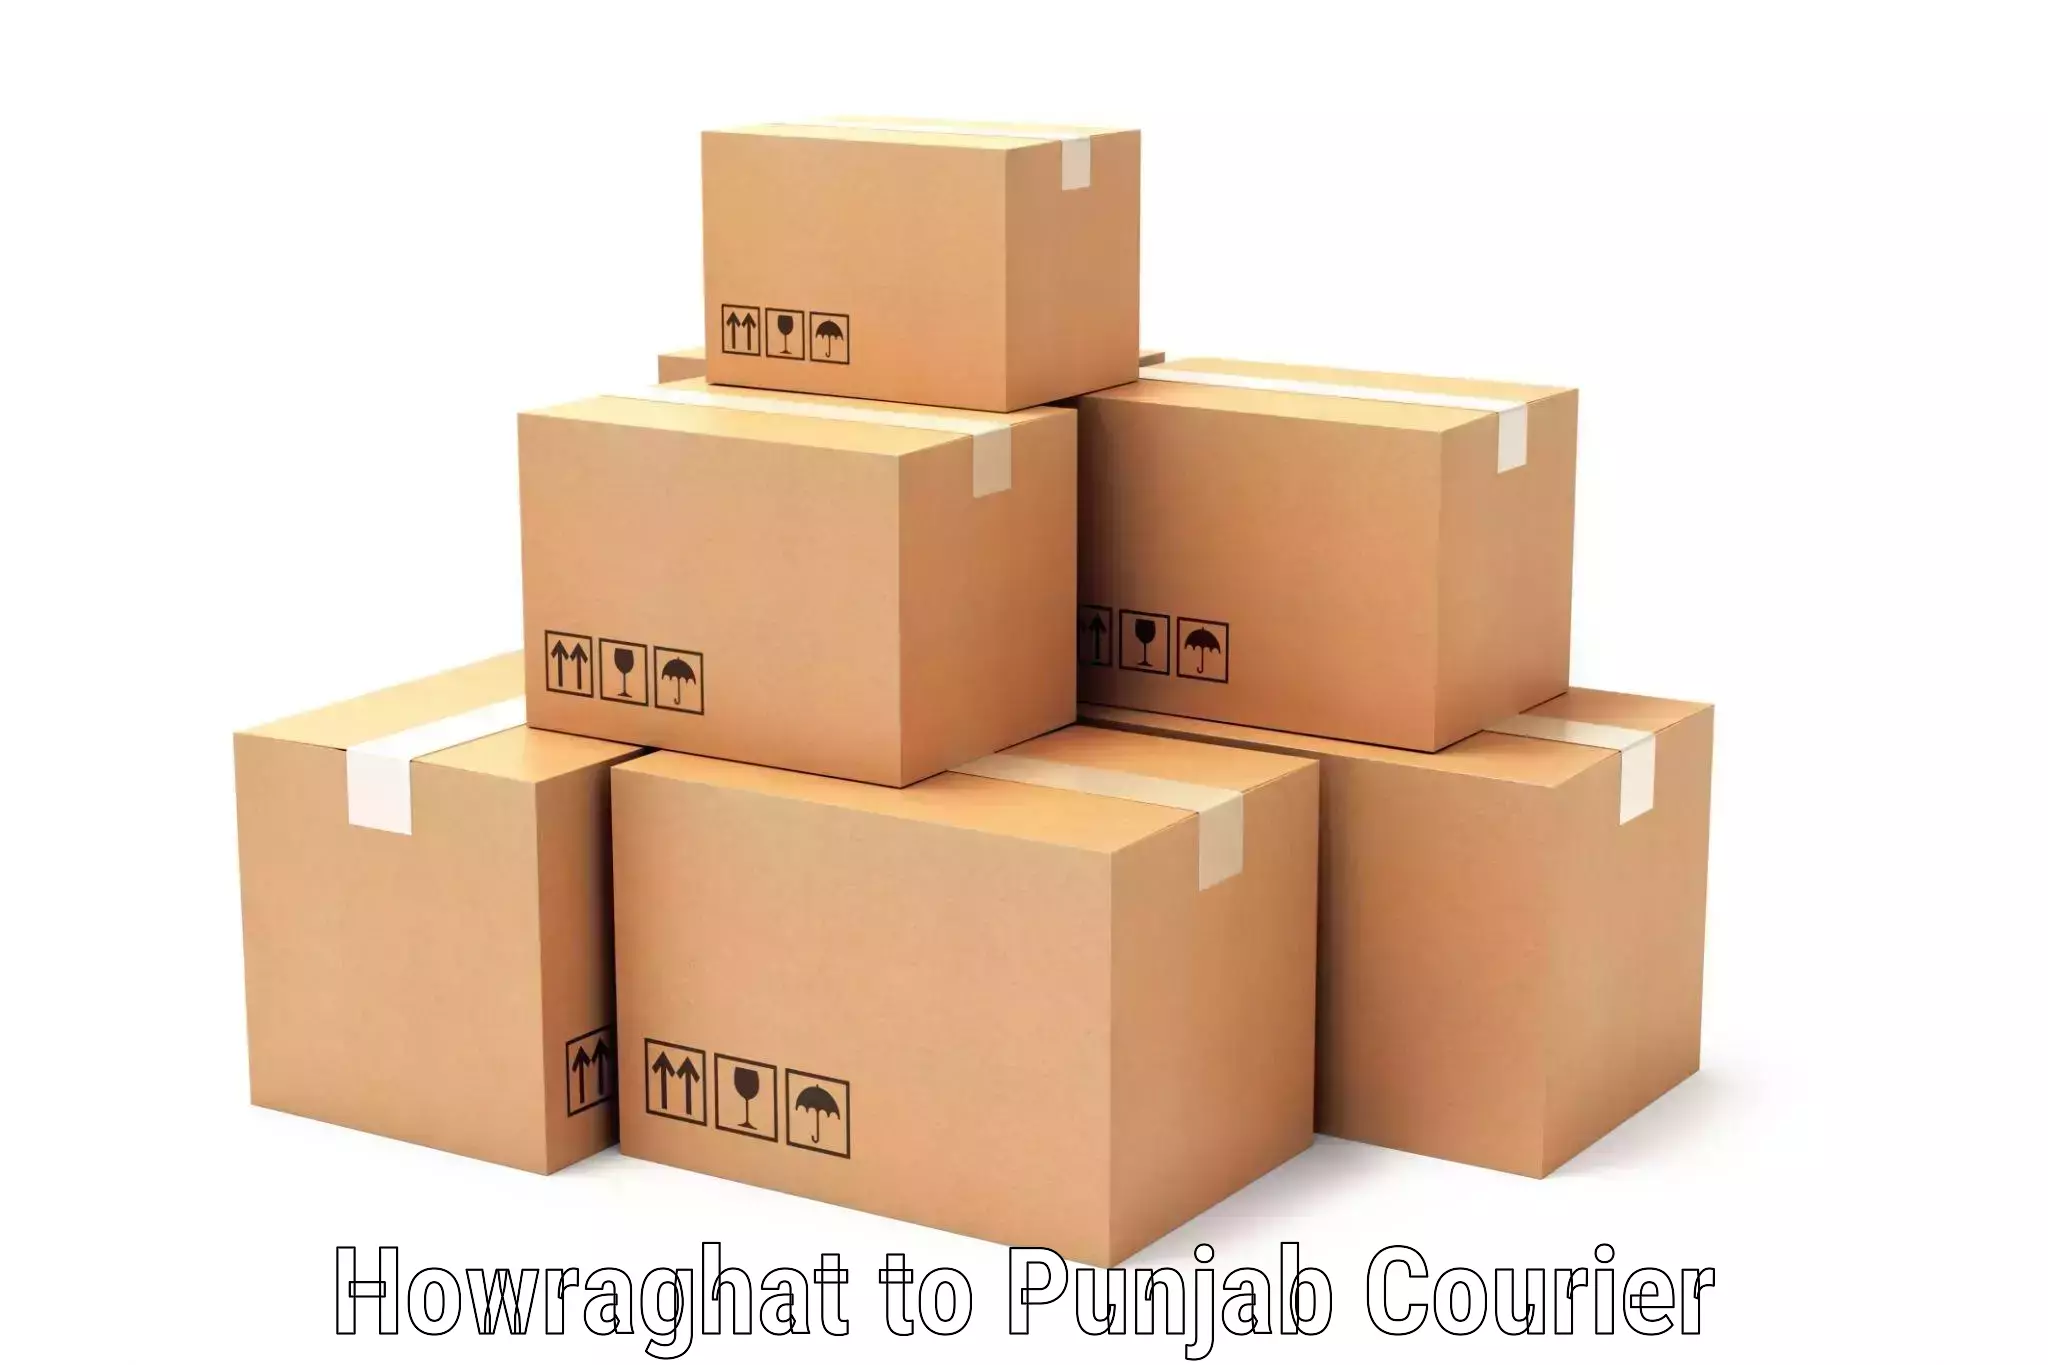 Rapid shipping services Howraghat to Sirhind Fatehgarh